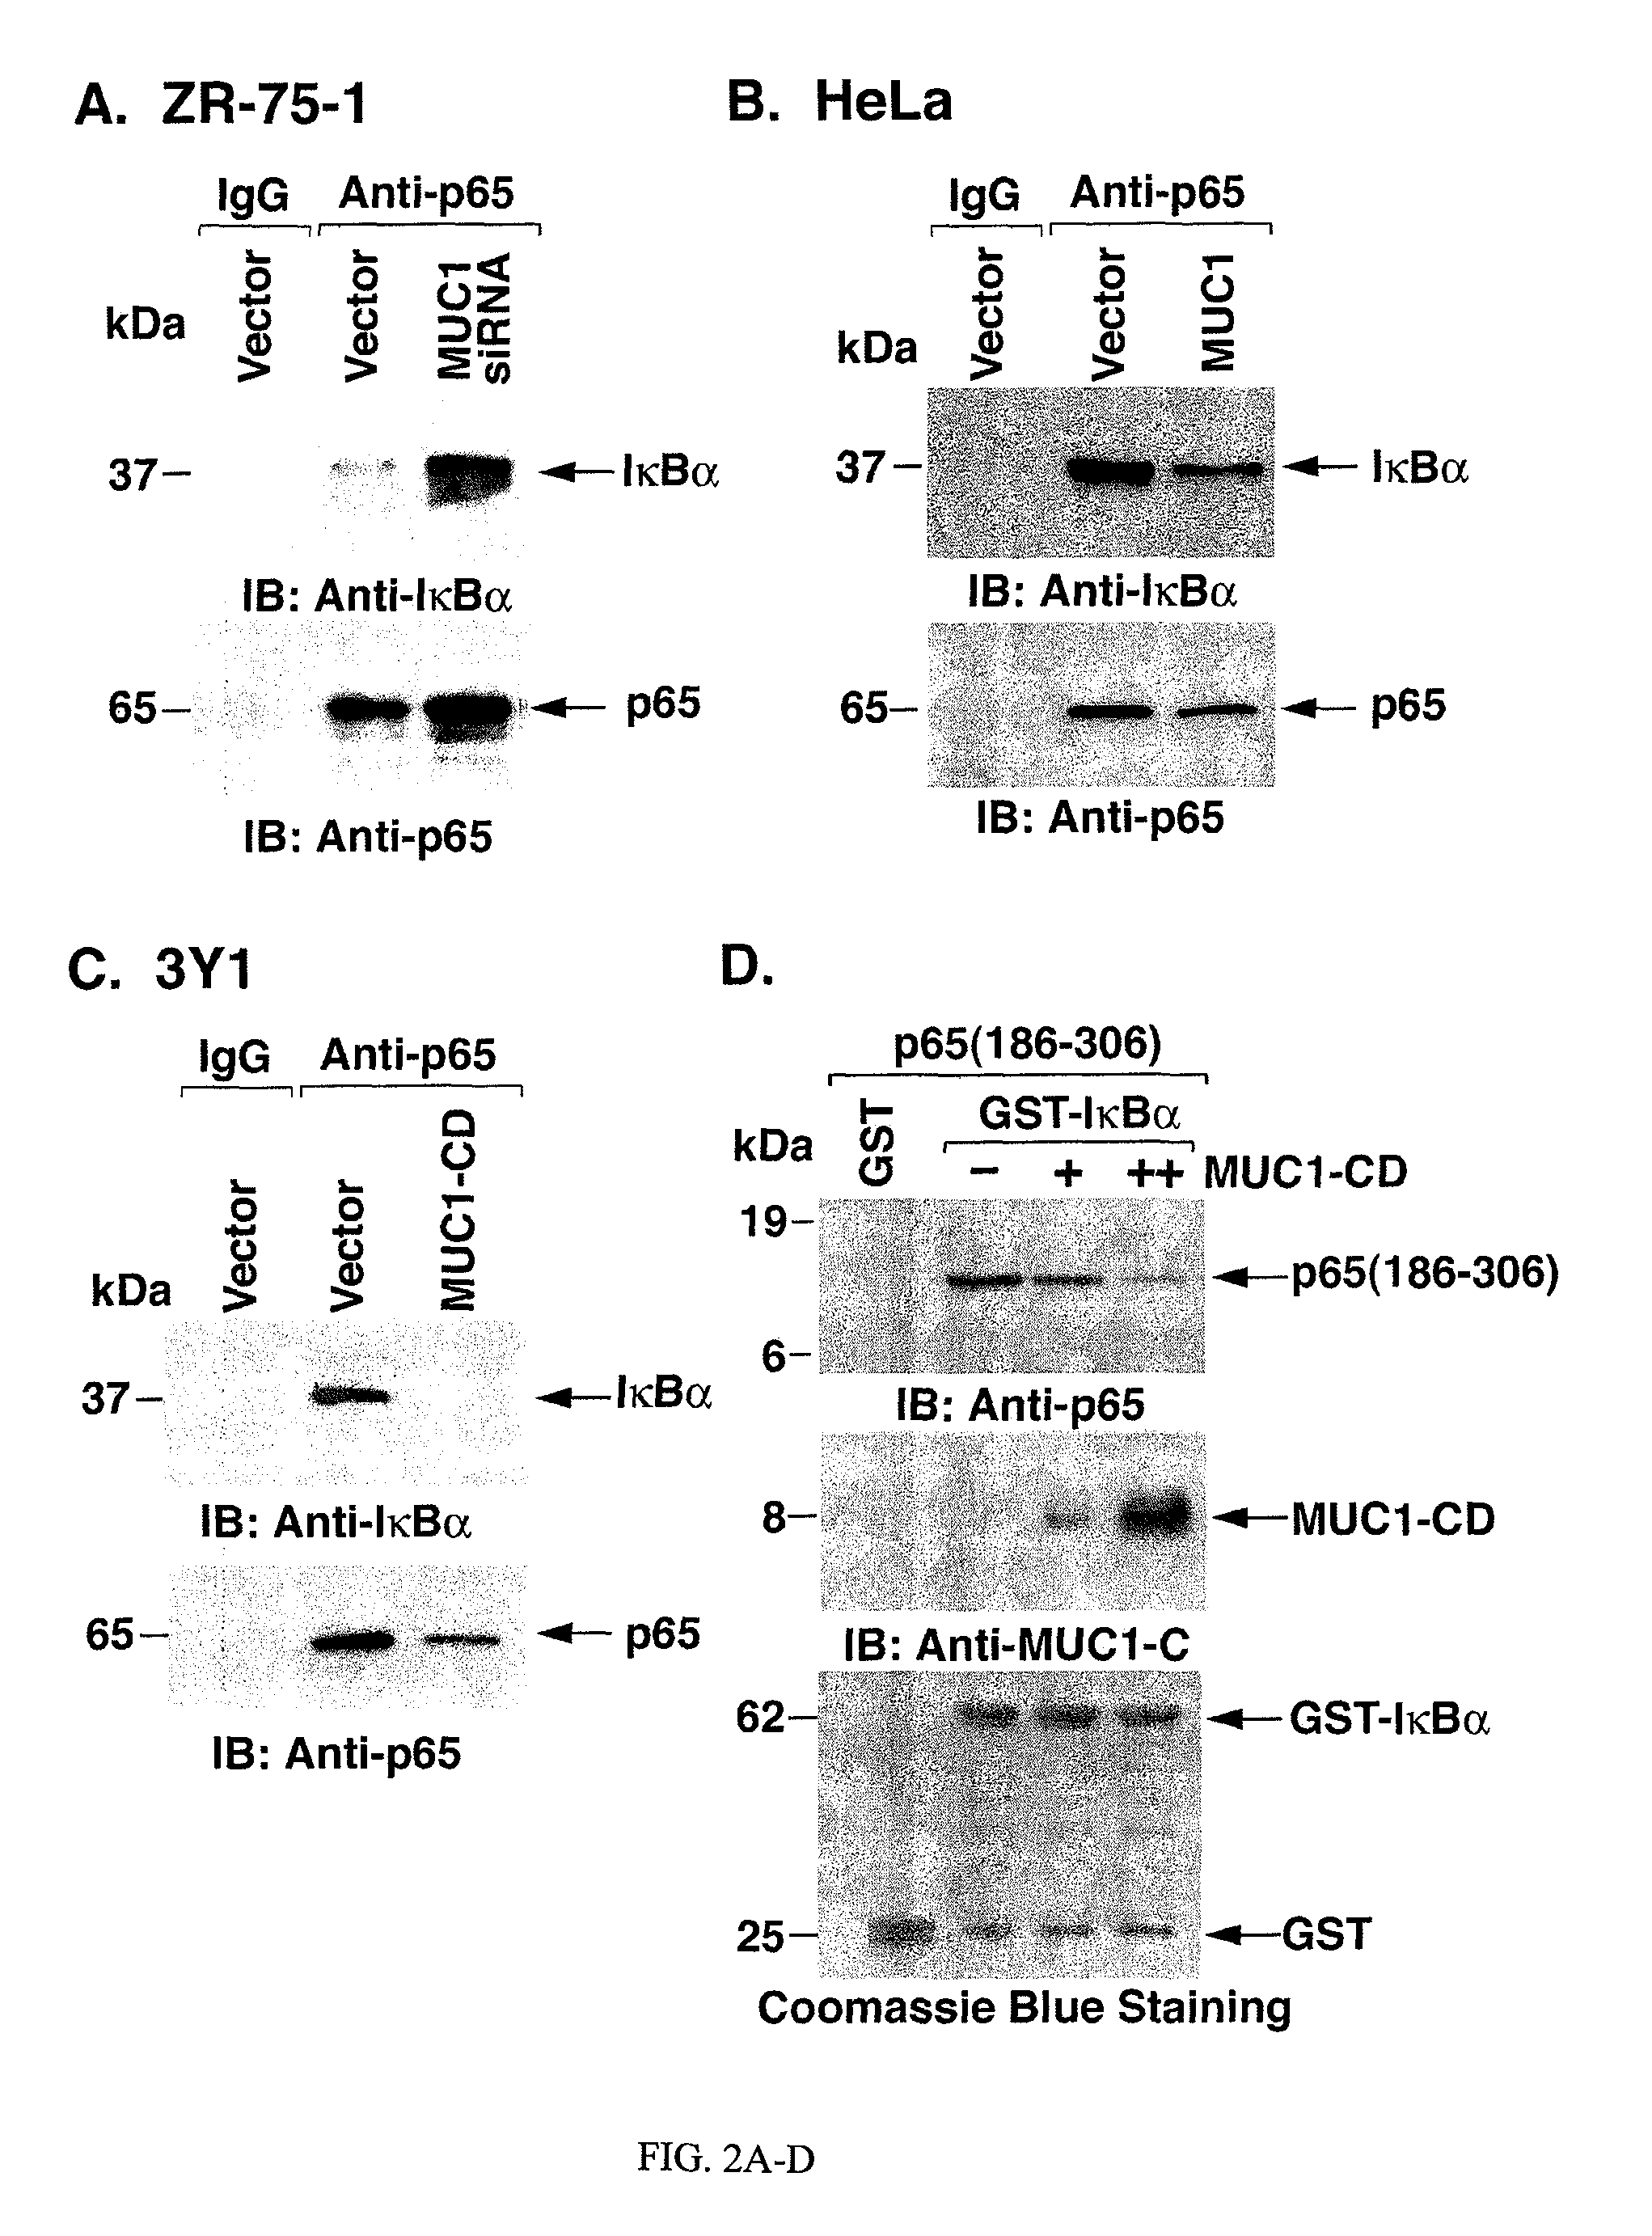 Inhibition of inflammation using antagonists of MUC1